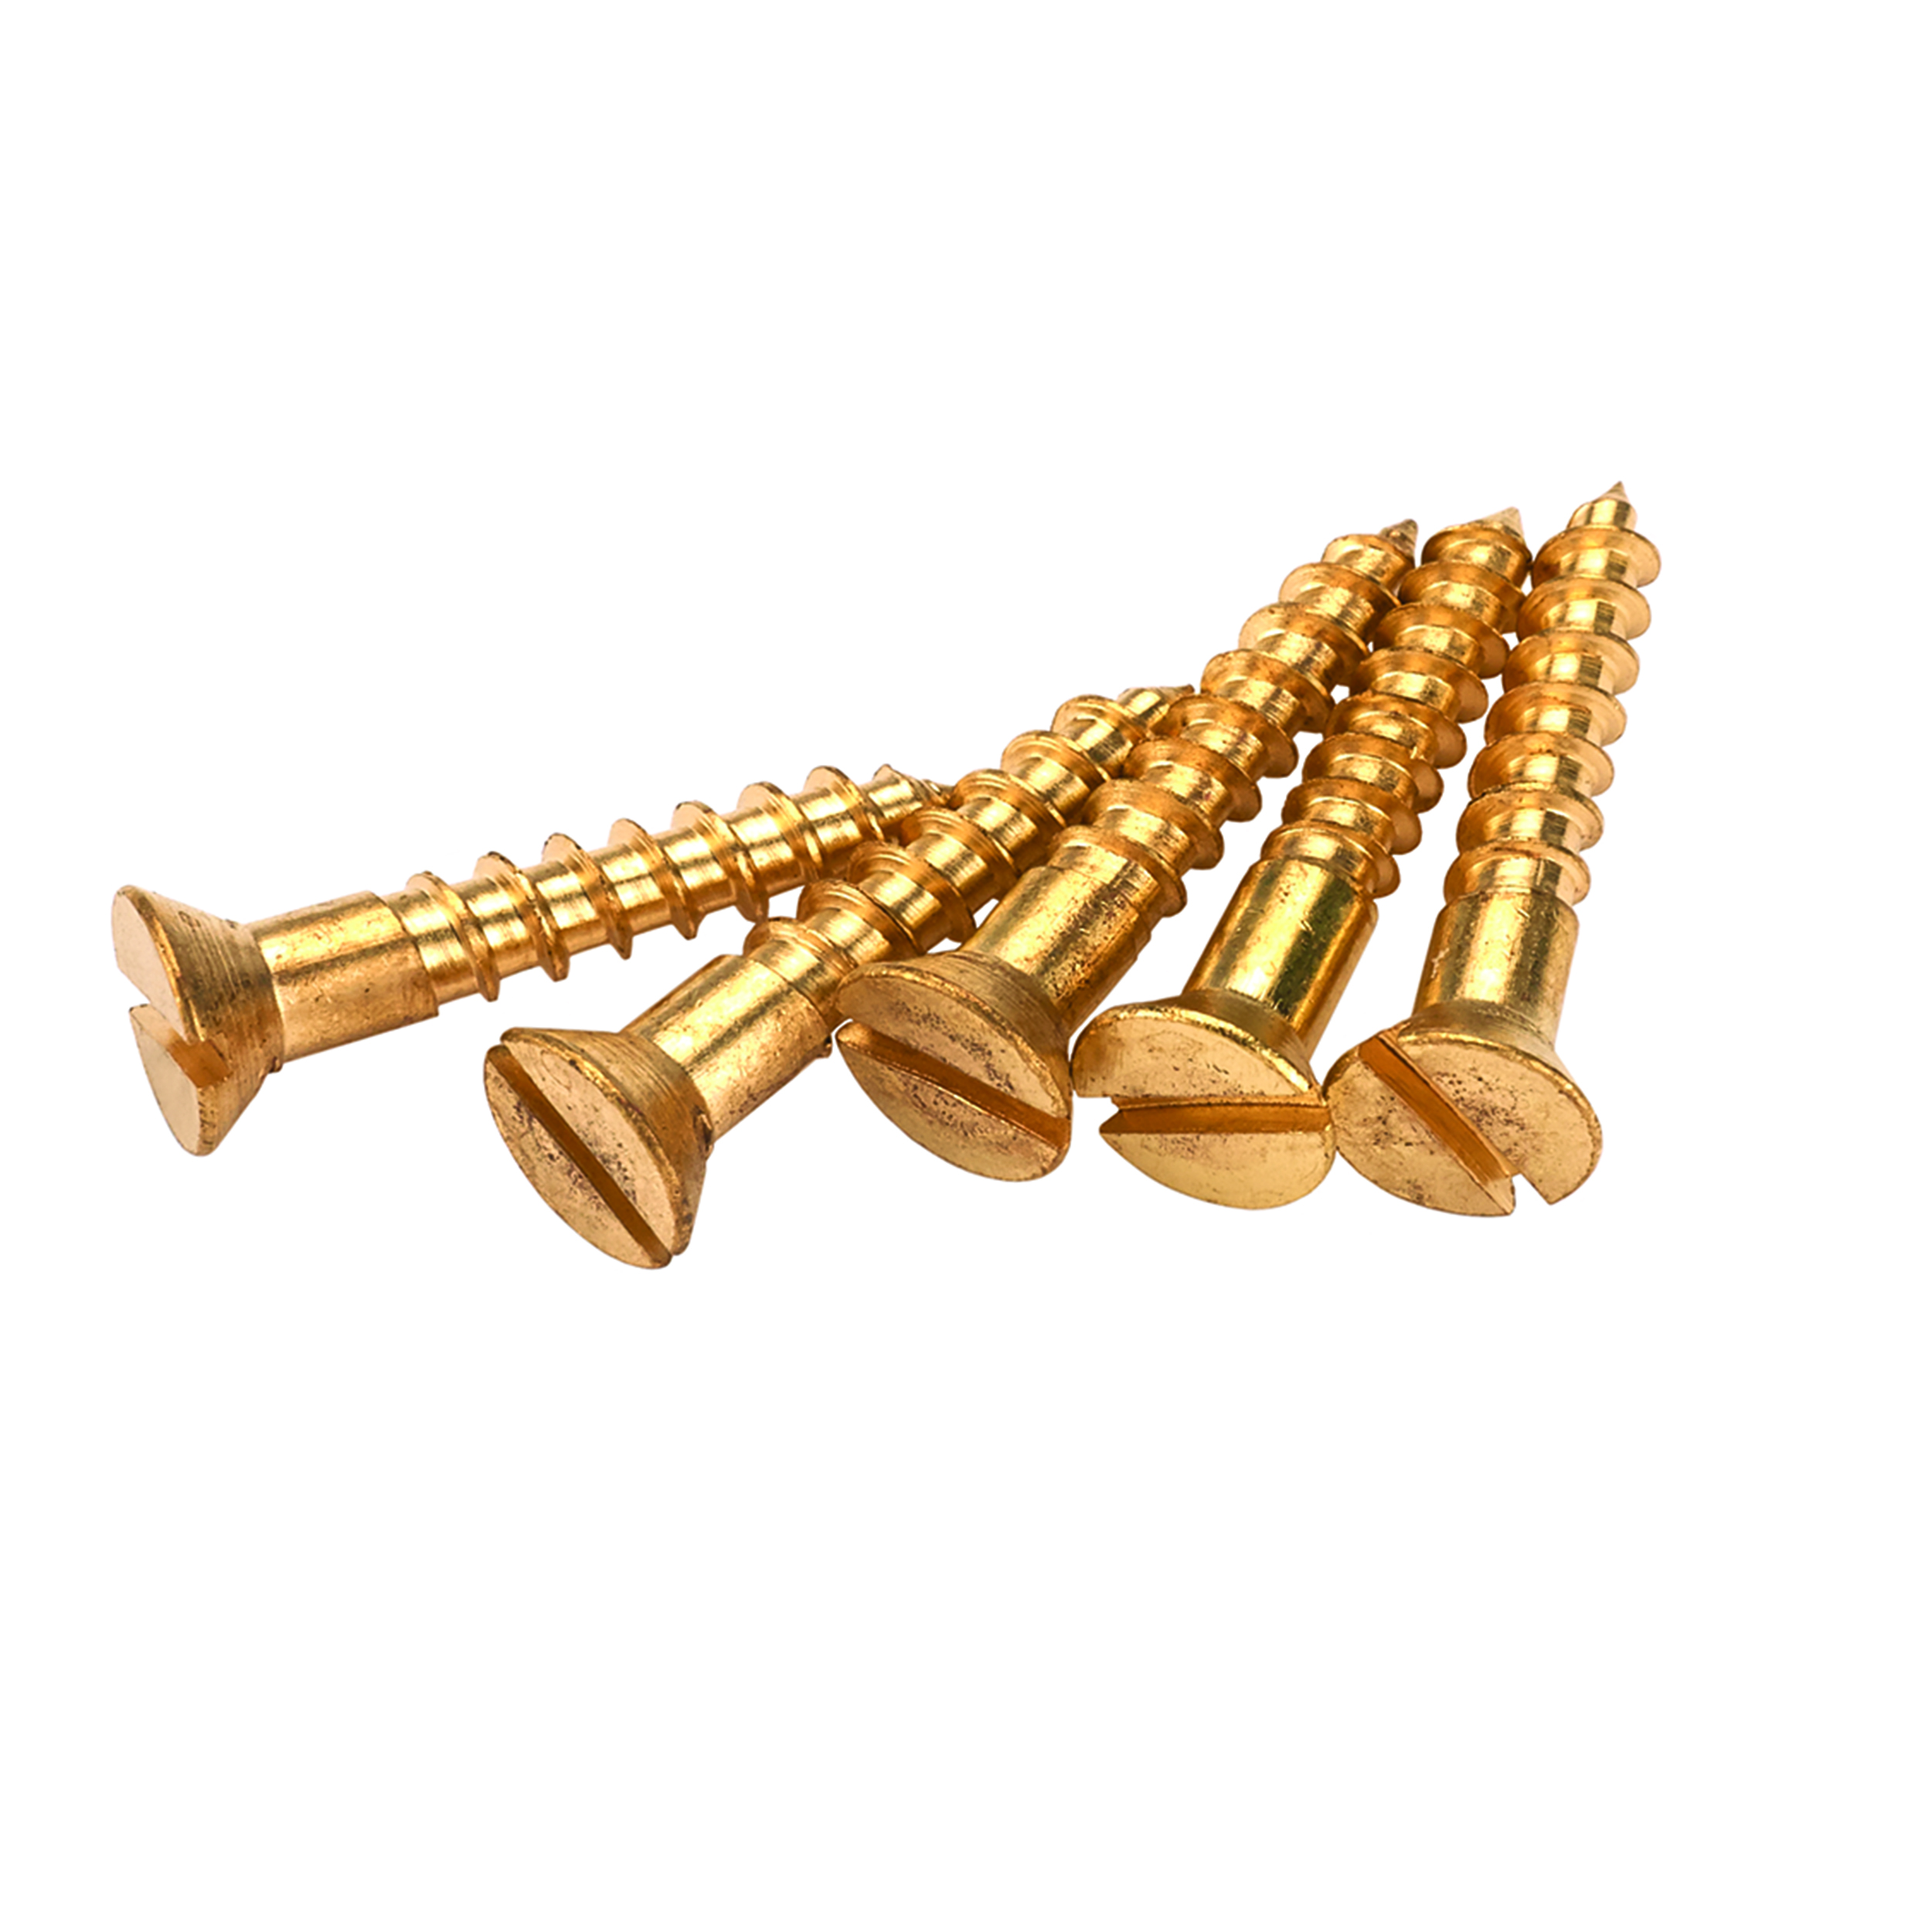 Solid Brass Screws #4 X 3/4" Slotted 25-piece